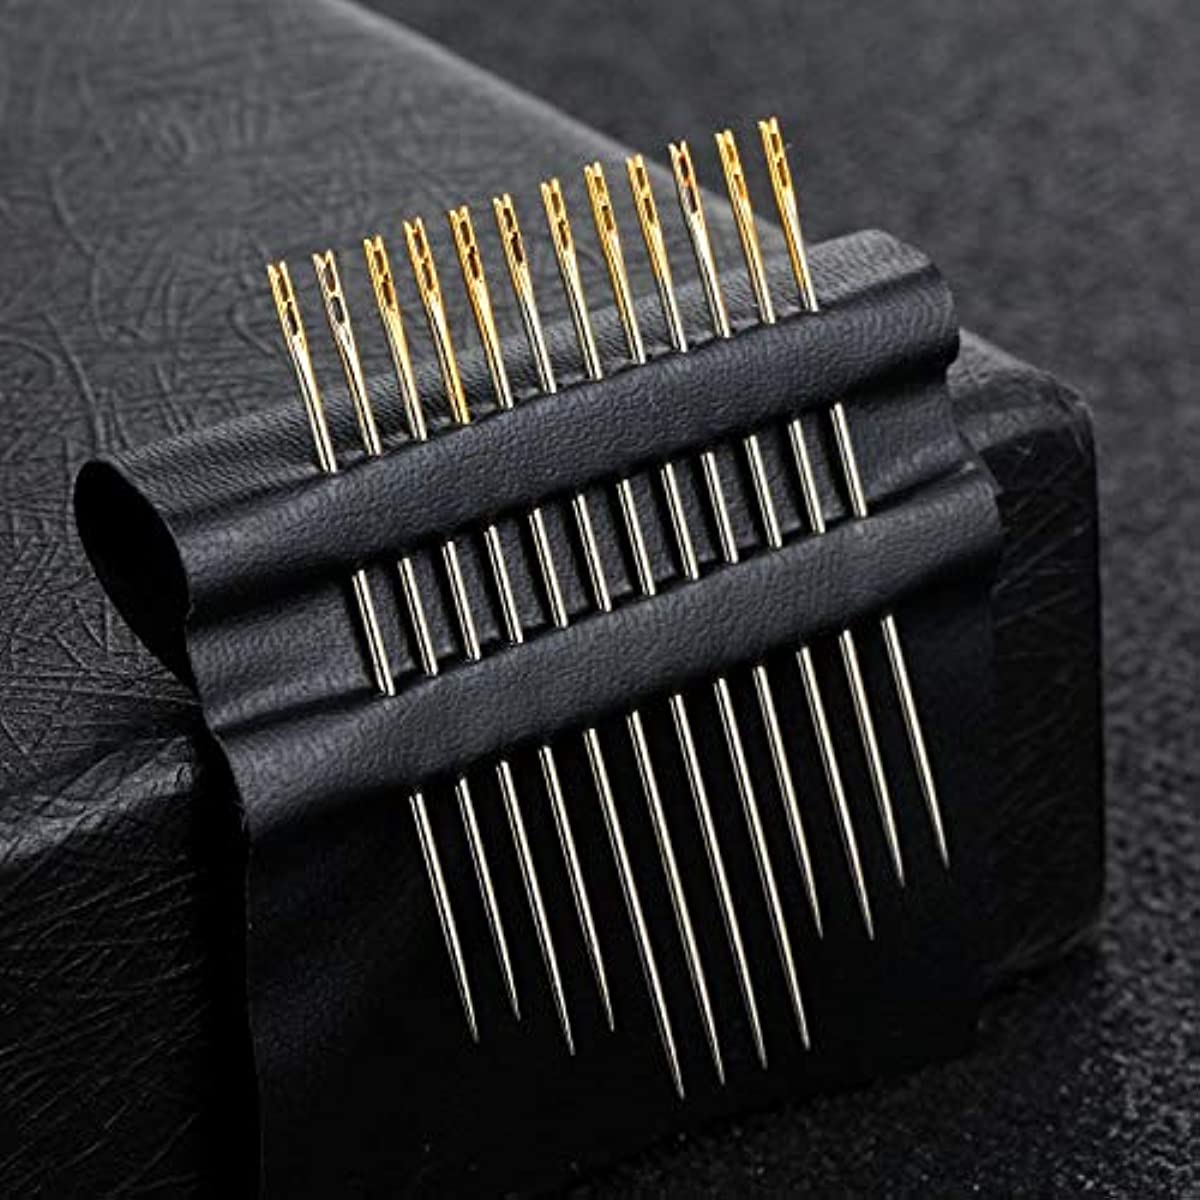 55pcs Stainless Steel Needle, Embroidery Needles For Hand Sewing